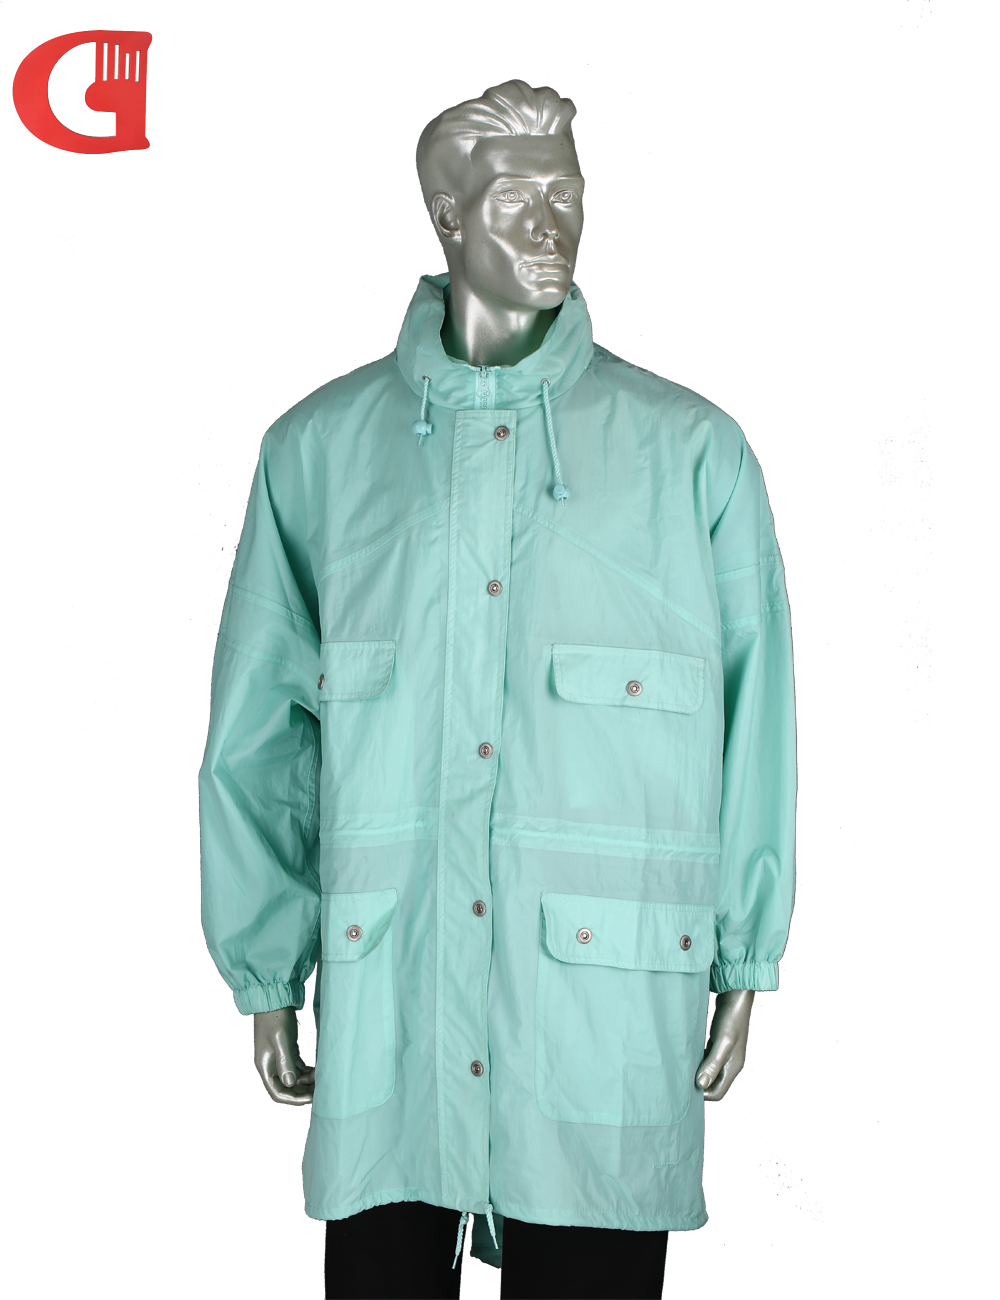  Raincoat Polyester Cycling Rain Jacket with Concealed Hood